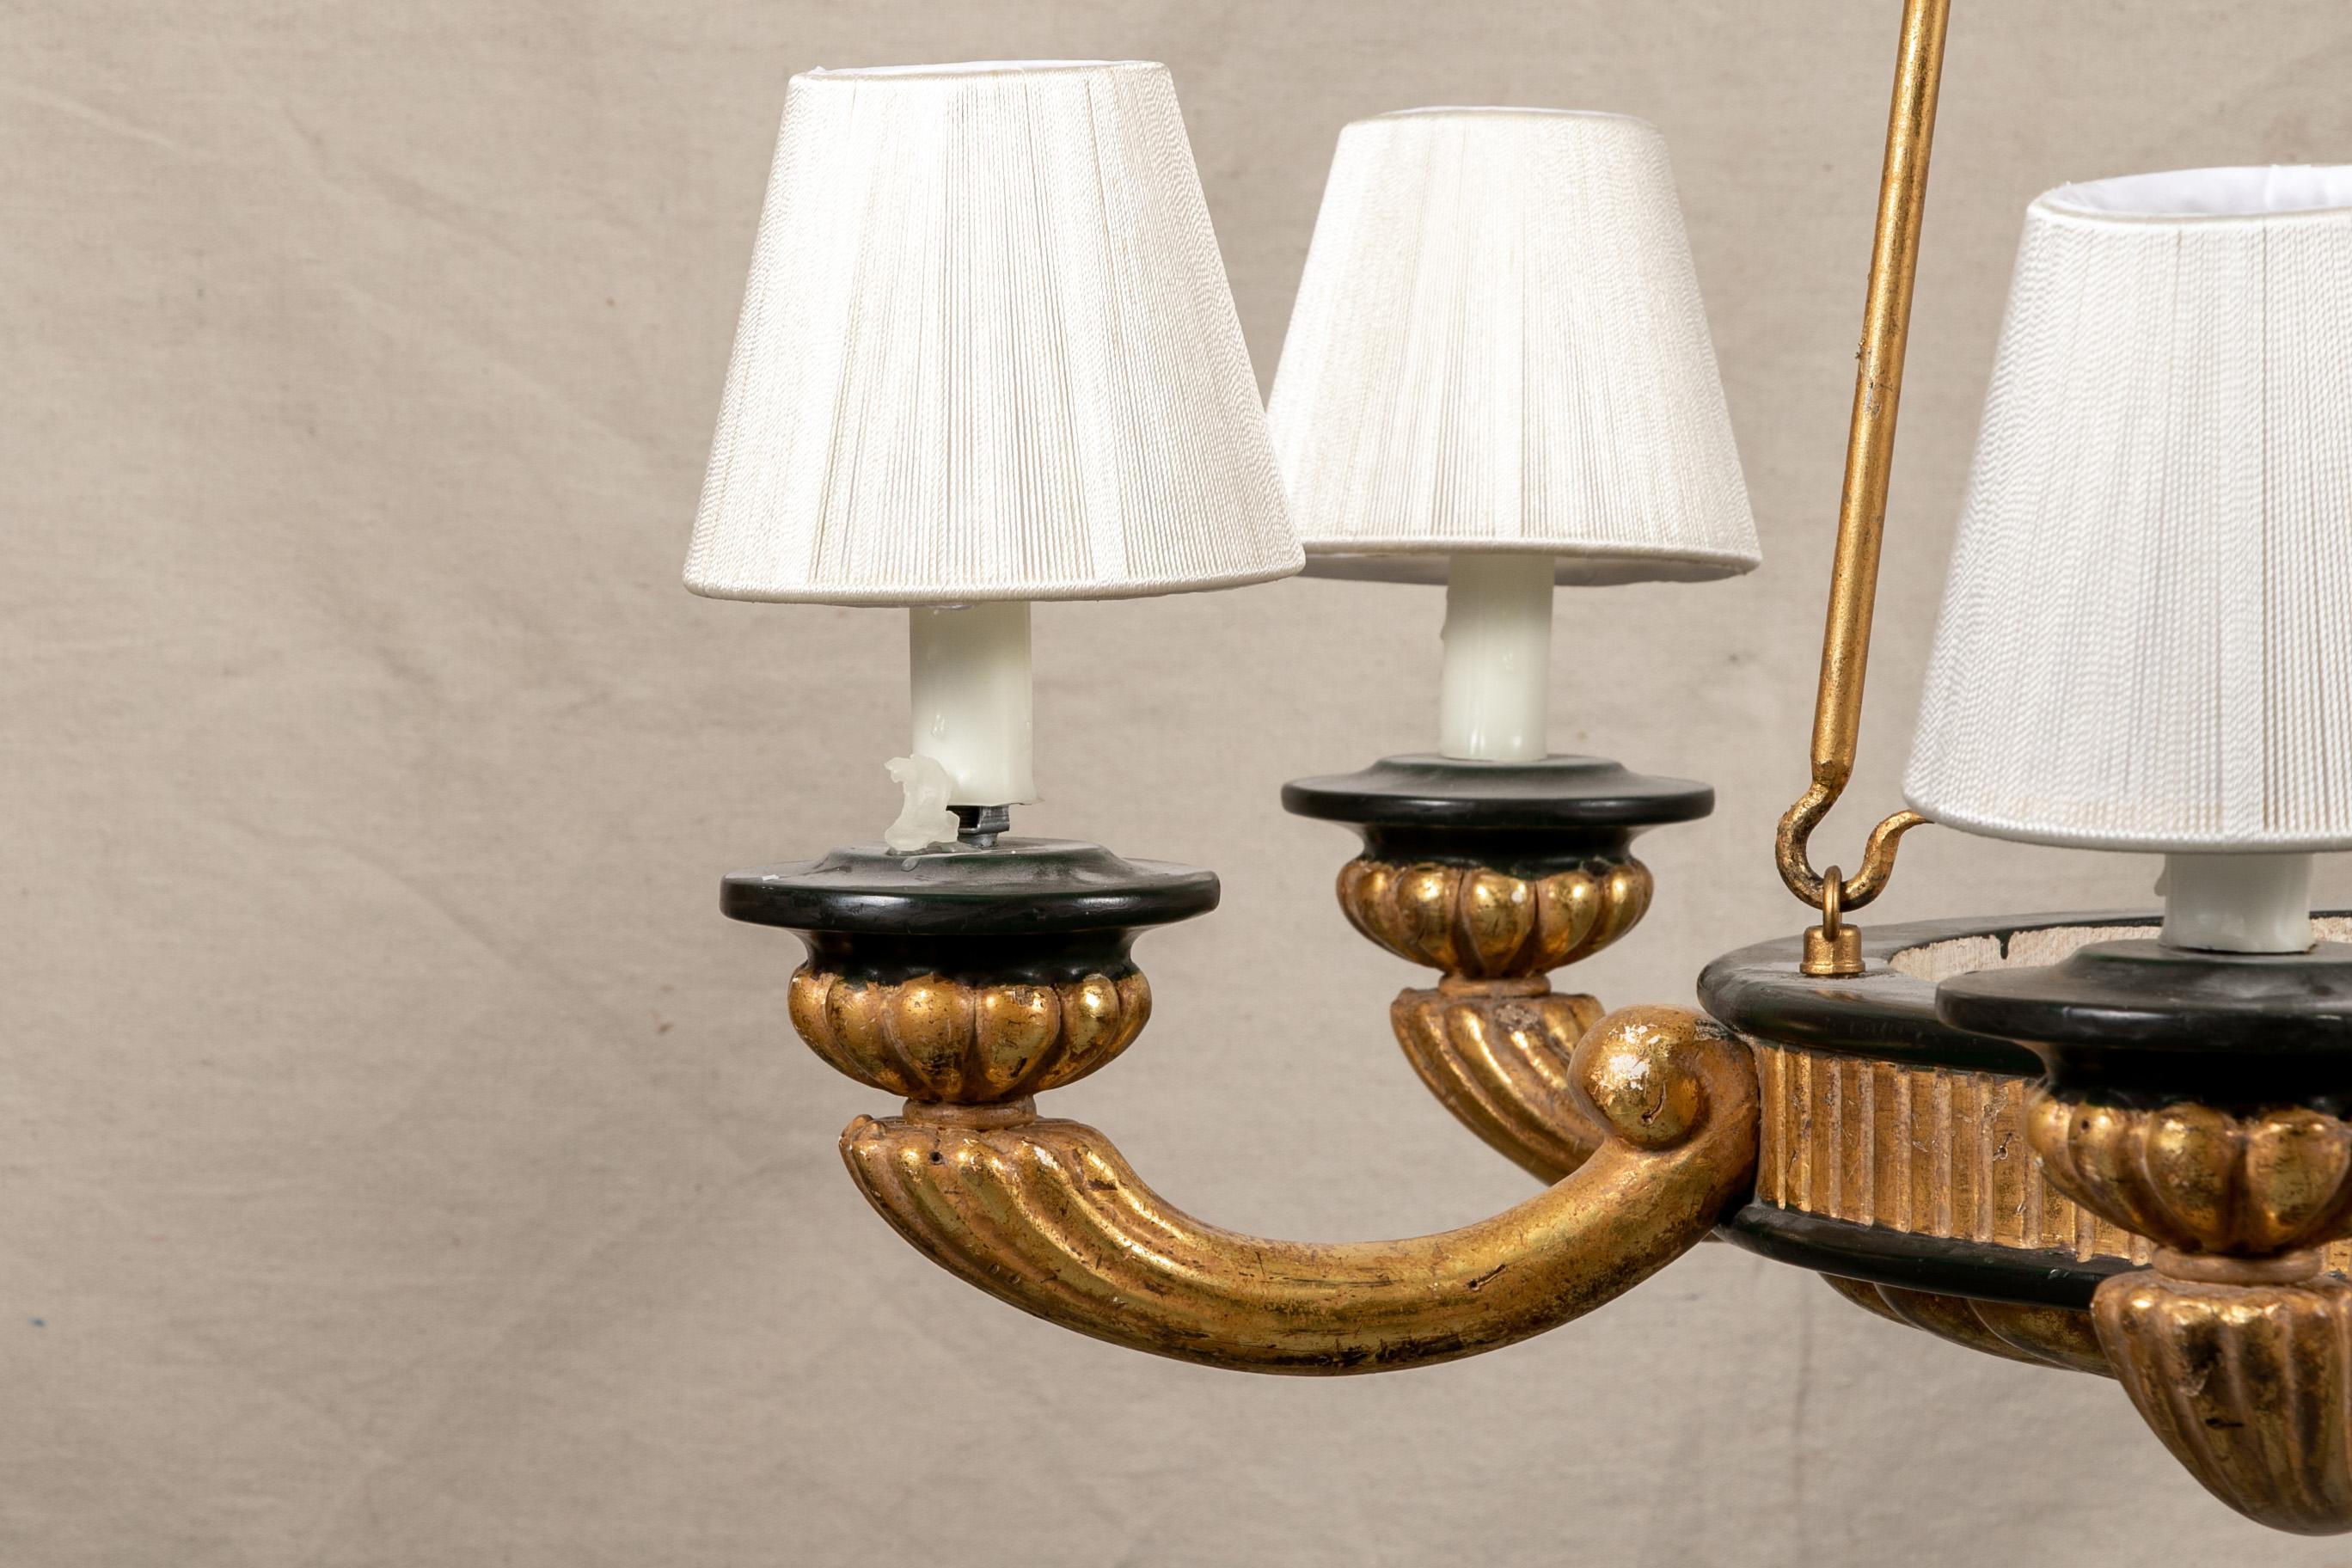 Pair of Italian classical style chandeliers, carved, gilt and ebonized, with circular frames with rosette bases for the six torch form ribbed arm lights. Three pendant rods support the whole with rosette ceiling attachments. Black details and